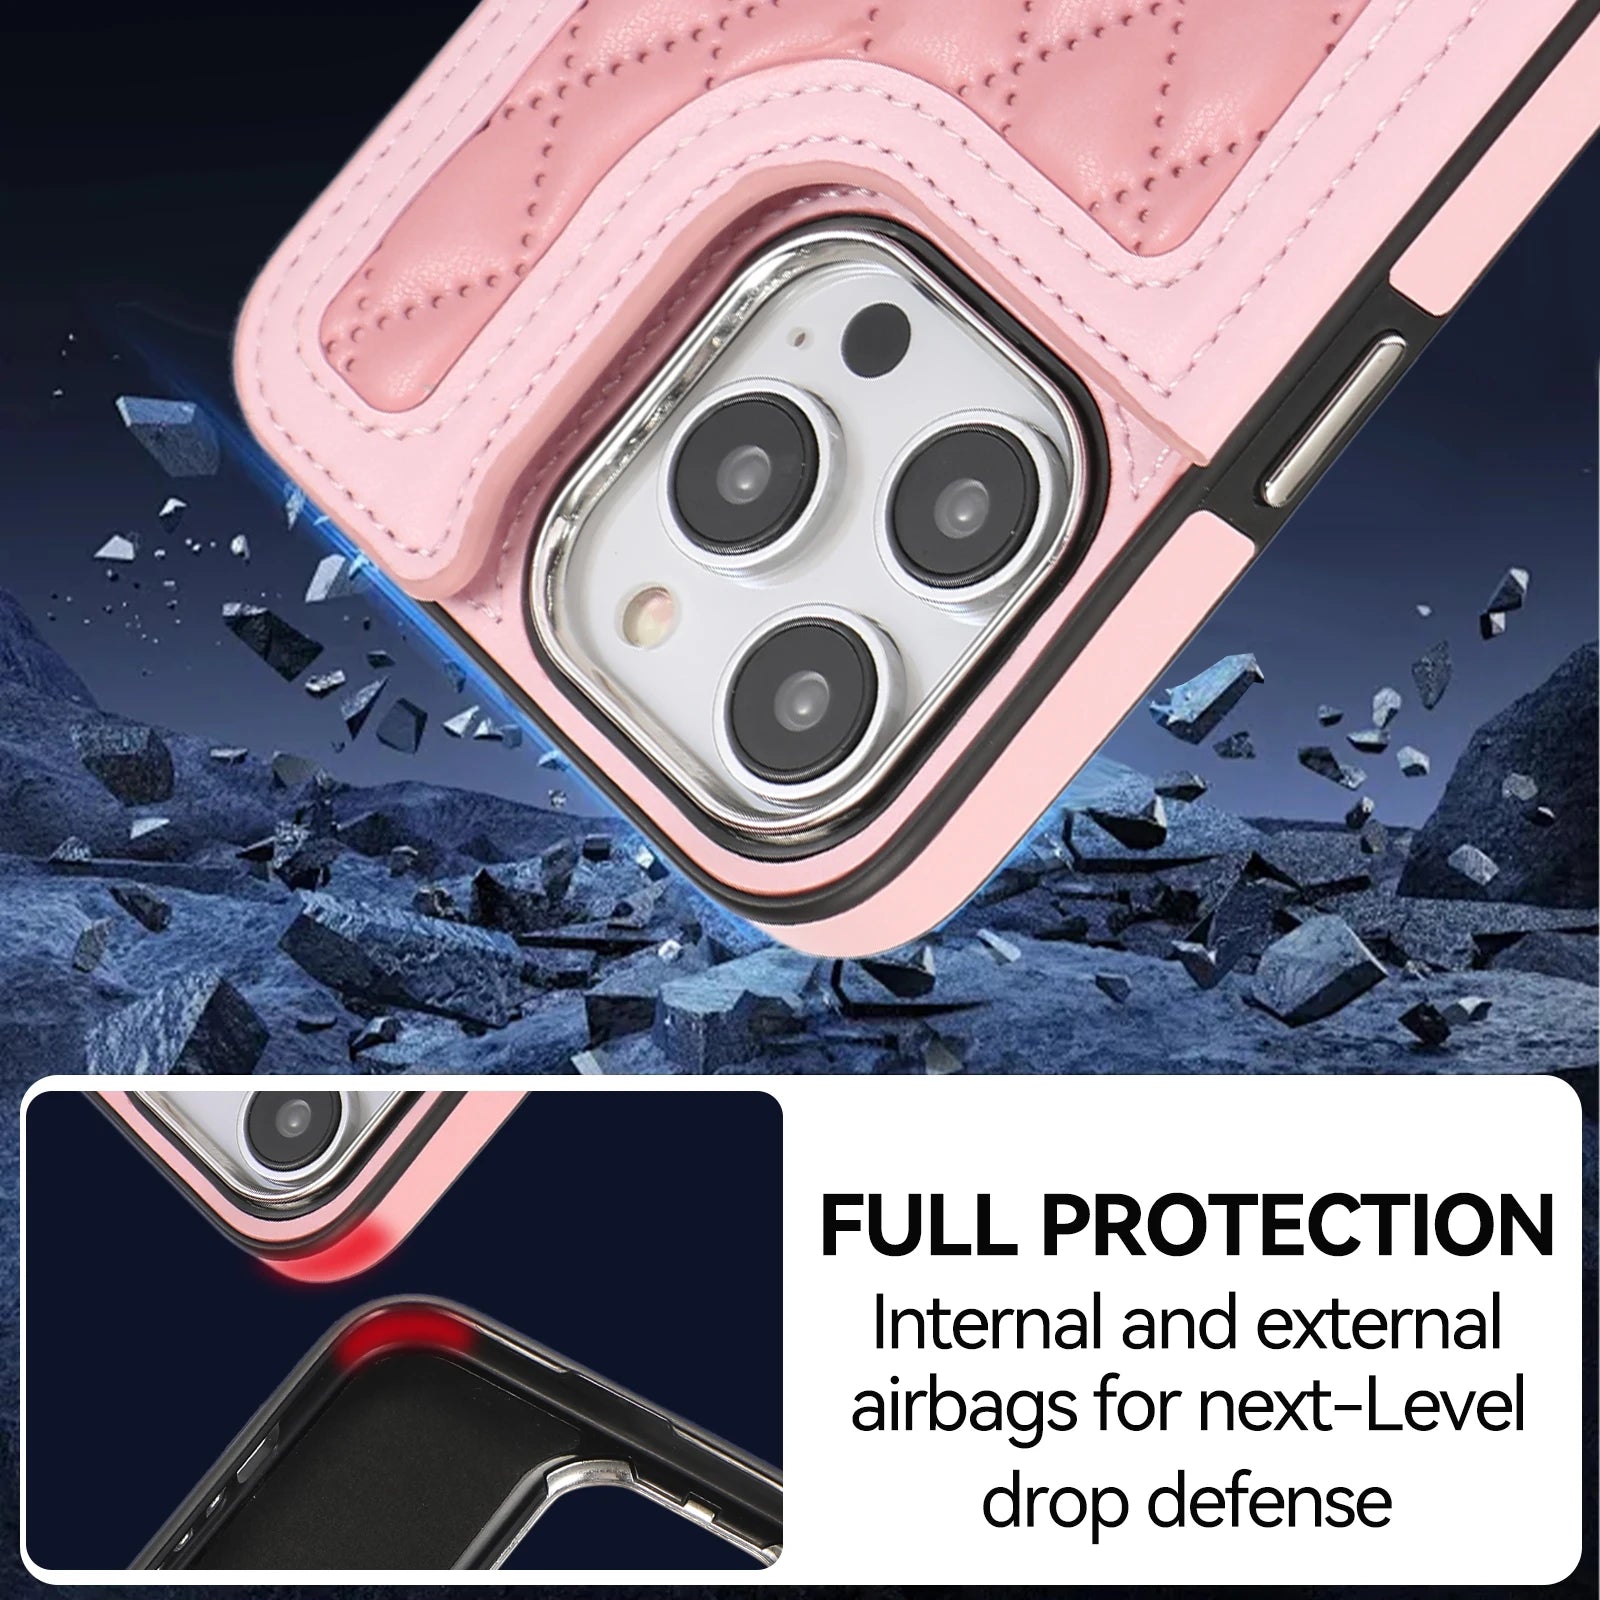 Crossbody Wallet RFID Leather Case with Ring Holder and Card Slot for iPhone 14 Series